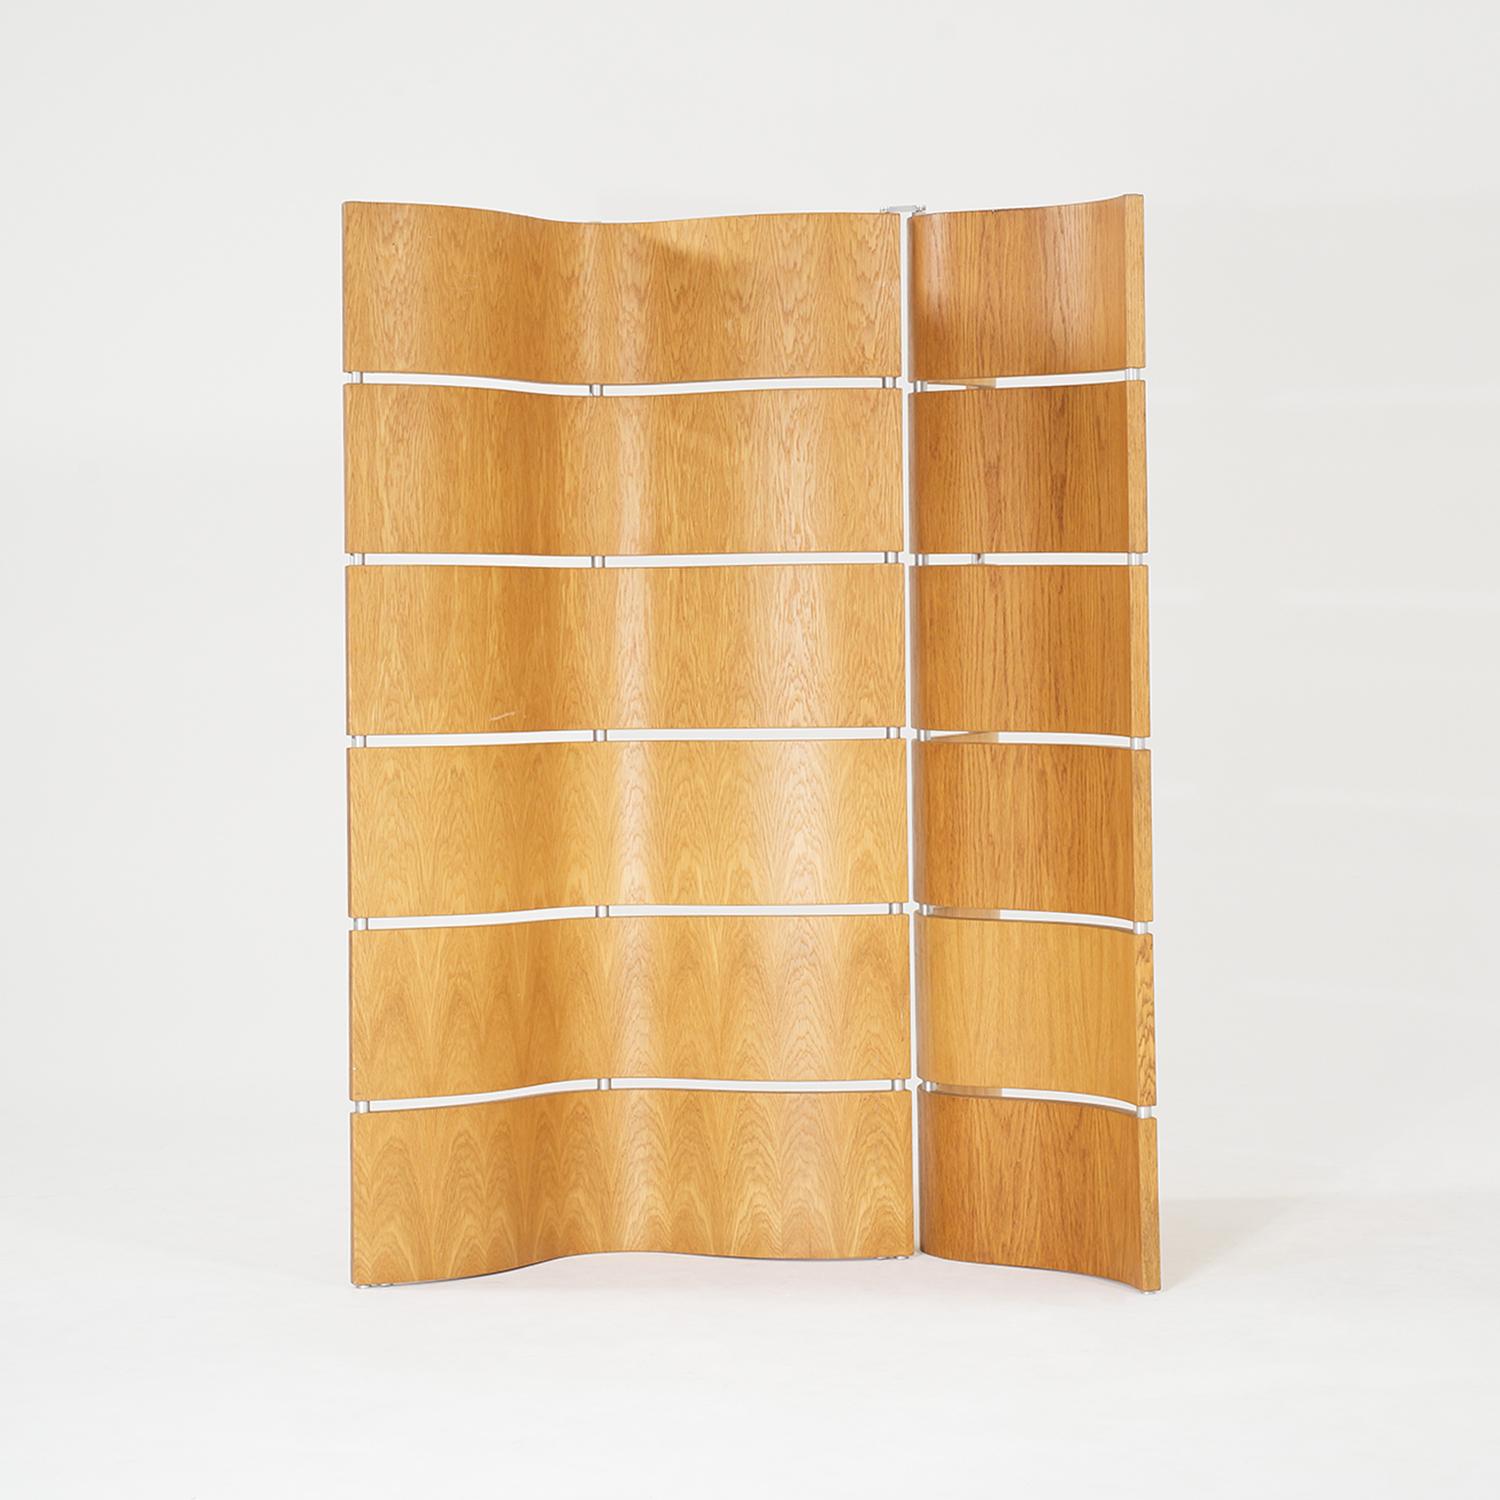 A sculptural, vintage Mid-Century modern Danish room divider made of hand crafted polished Birchwood, in good condition. The large Scandinavian screen has two adjustable, flexible wavy wooden panels which are supported by a painted chrome frame.